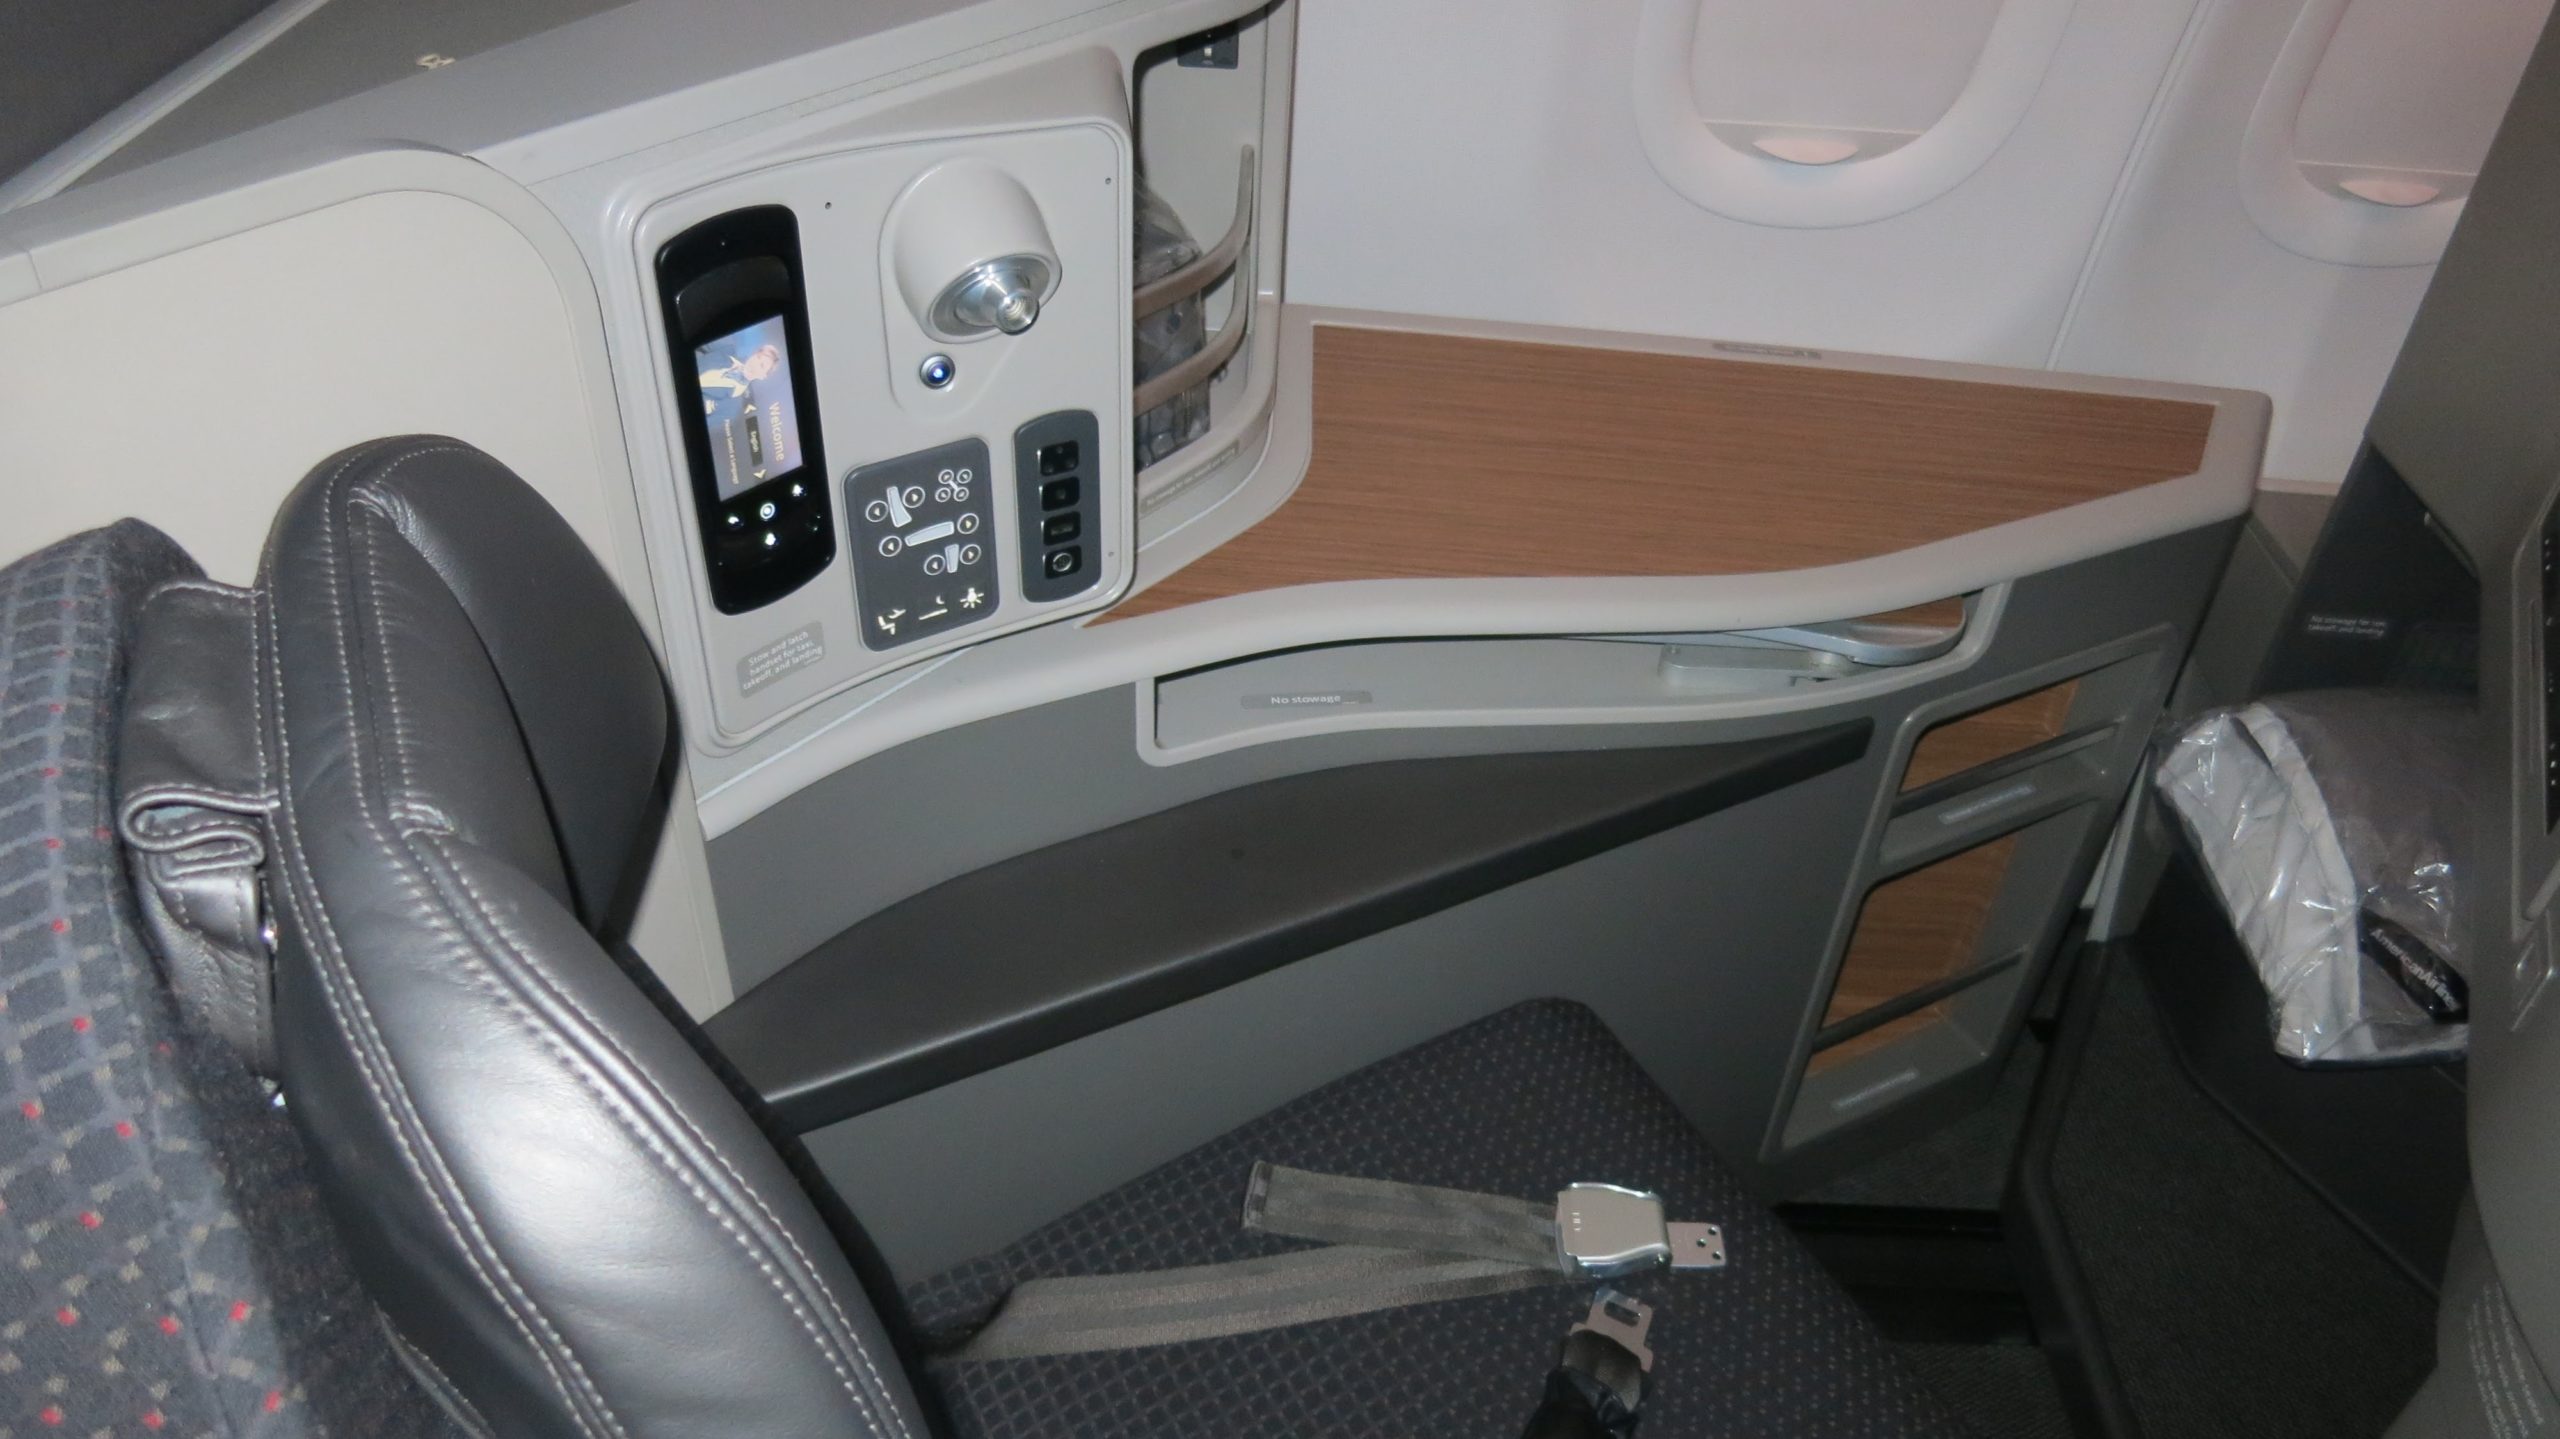 American Flagship First Transcon Seat